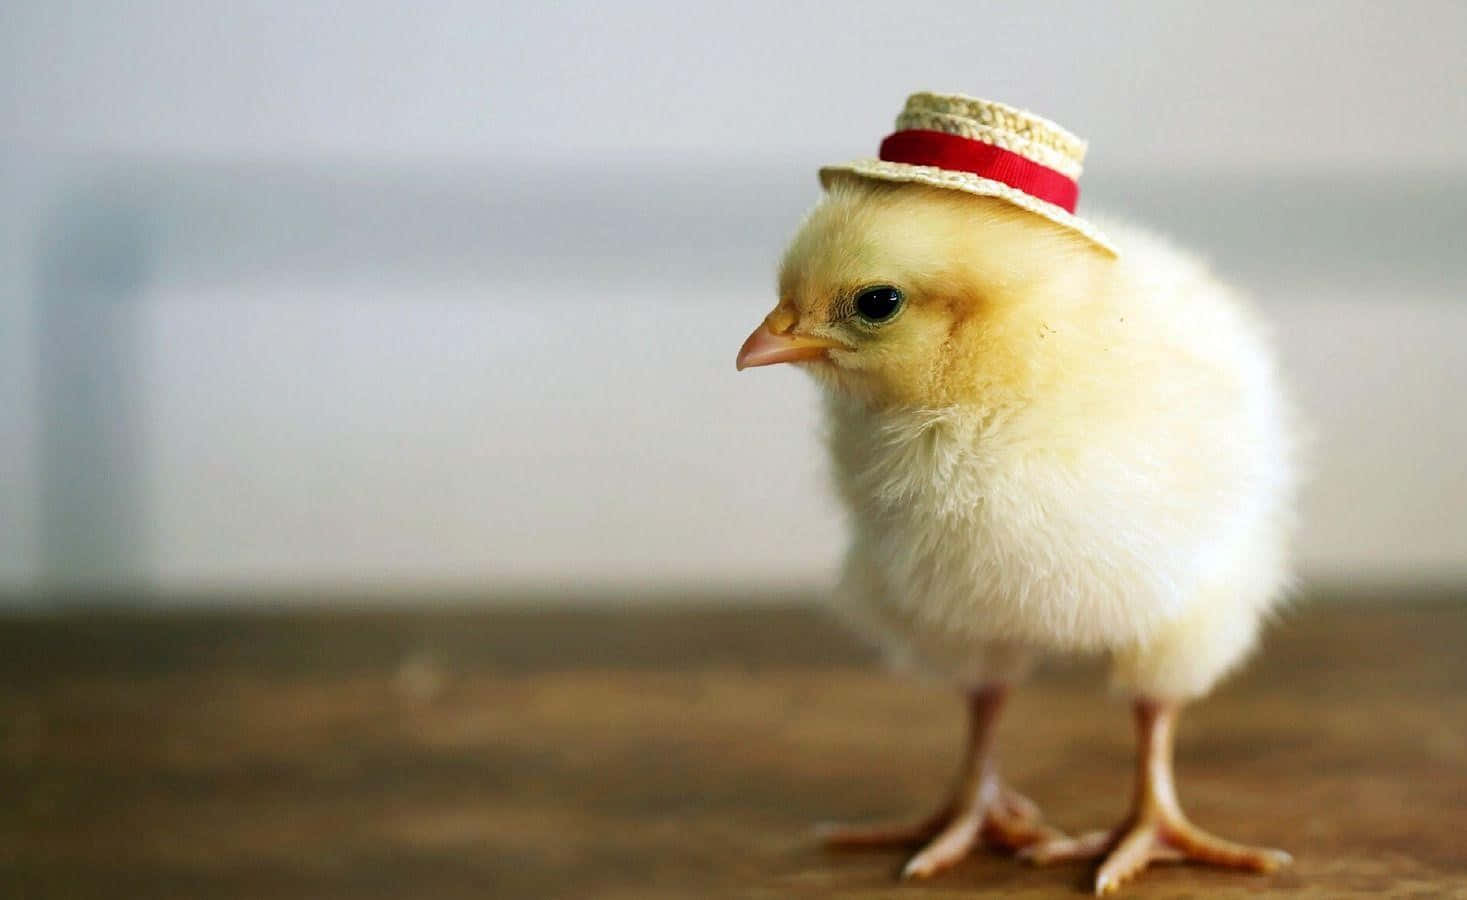 A Small Chicken Wearing A Straw Hat